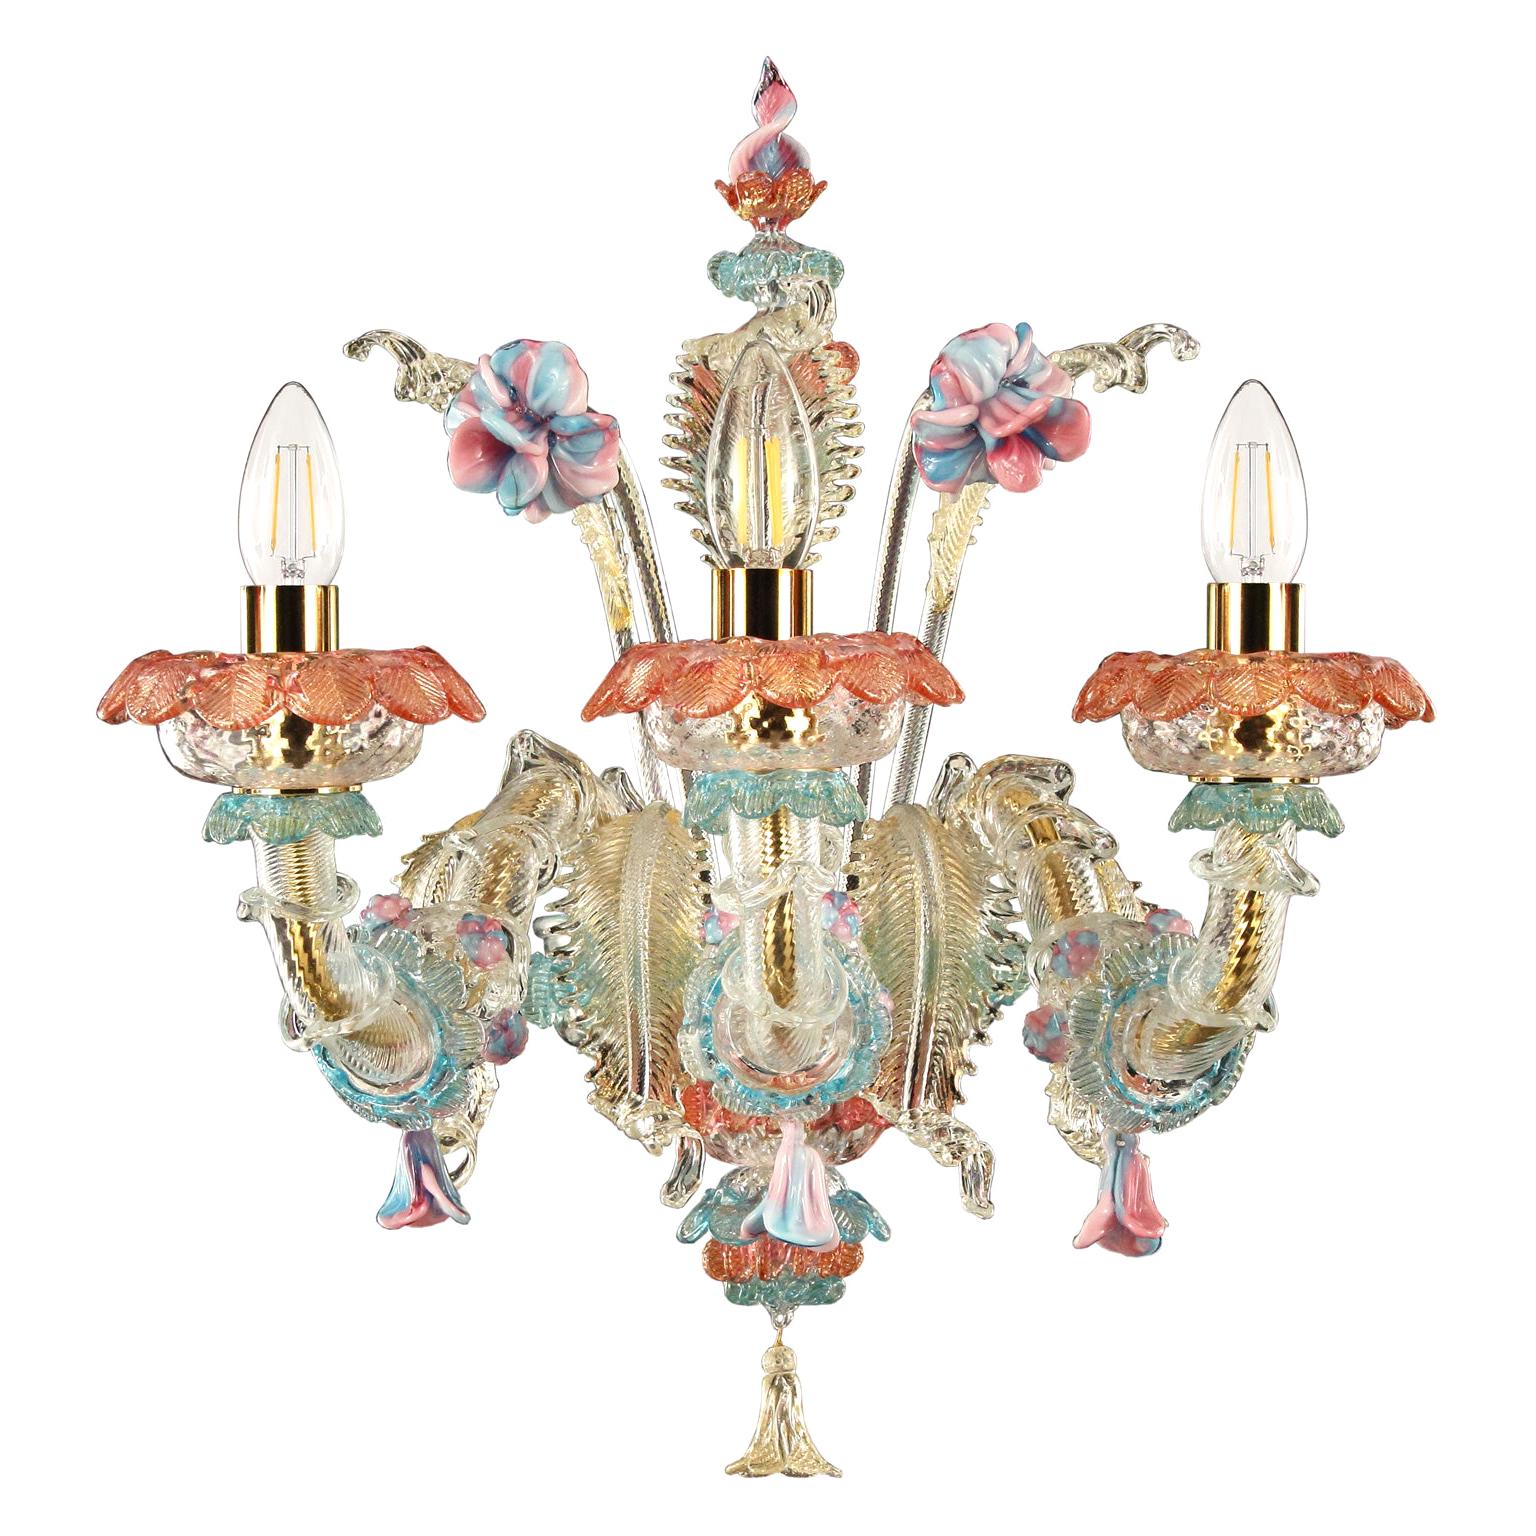 Sconce 3 arms Crystal and Gold, details in Pink and Light Blue by Multiforme For Sale